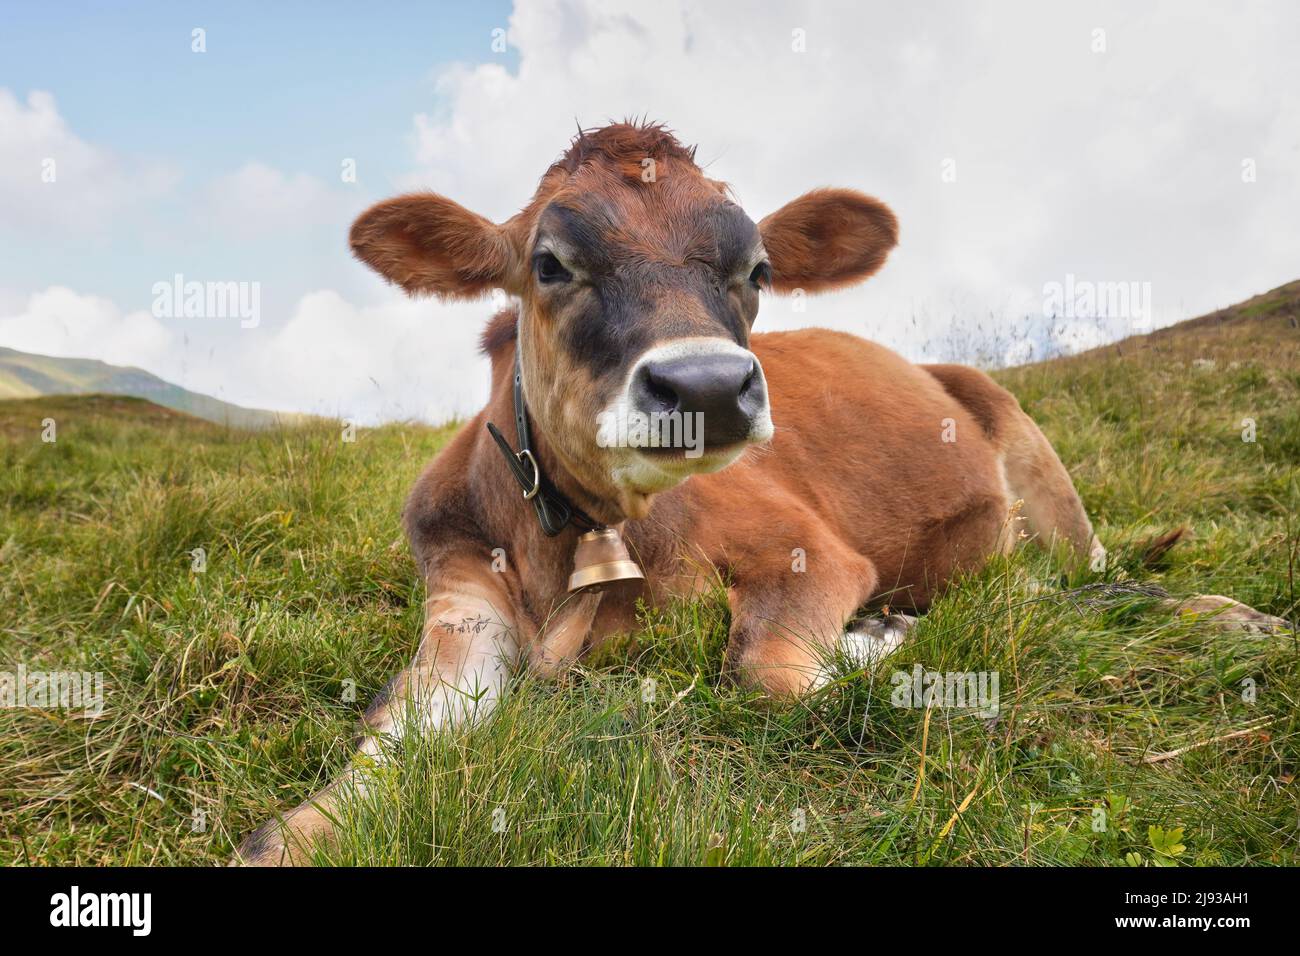 Calf on the alpine meadow. Young cow in the Alps. Stock Photo